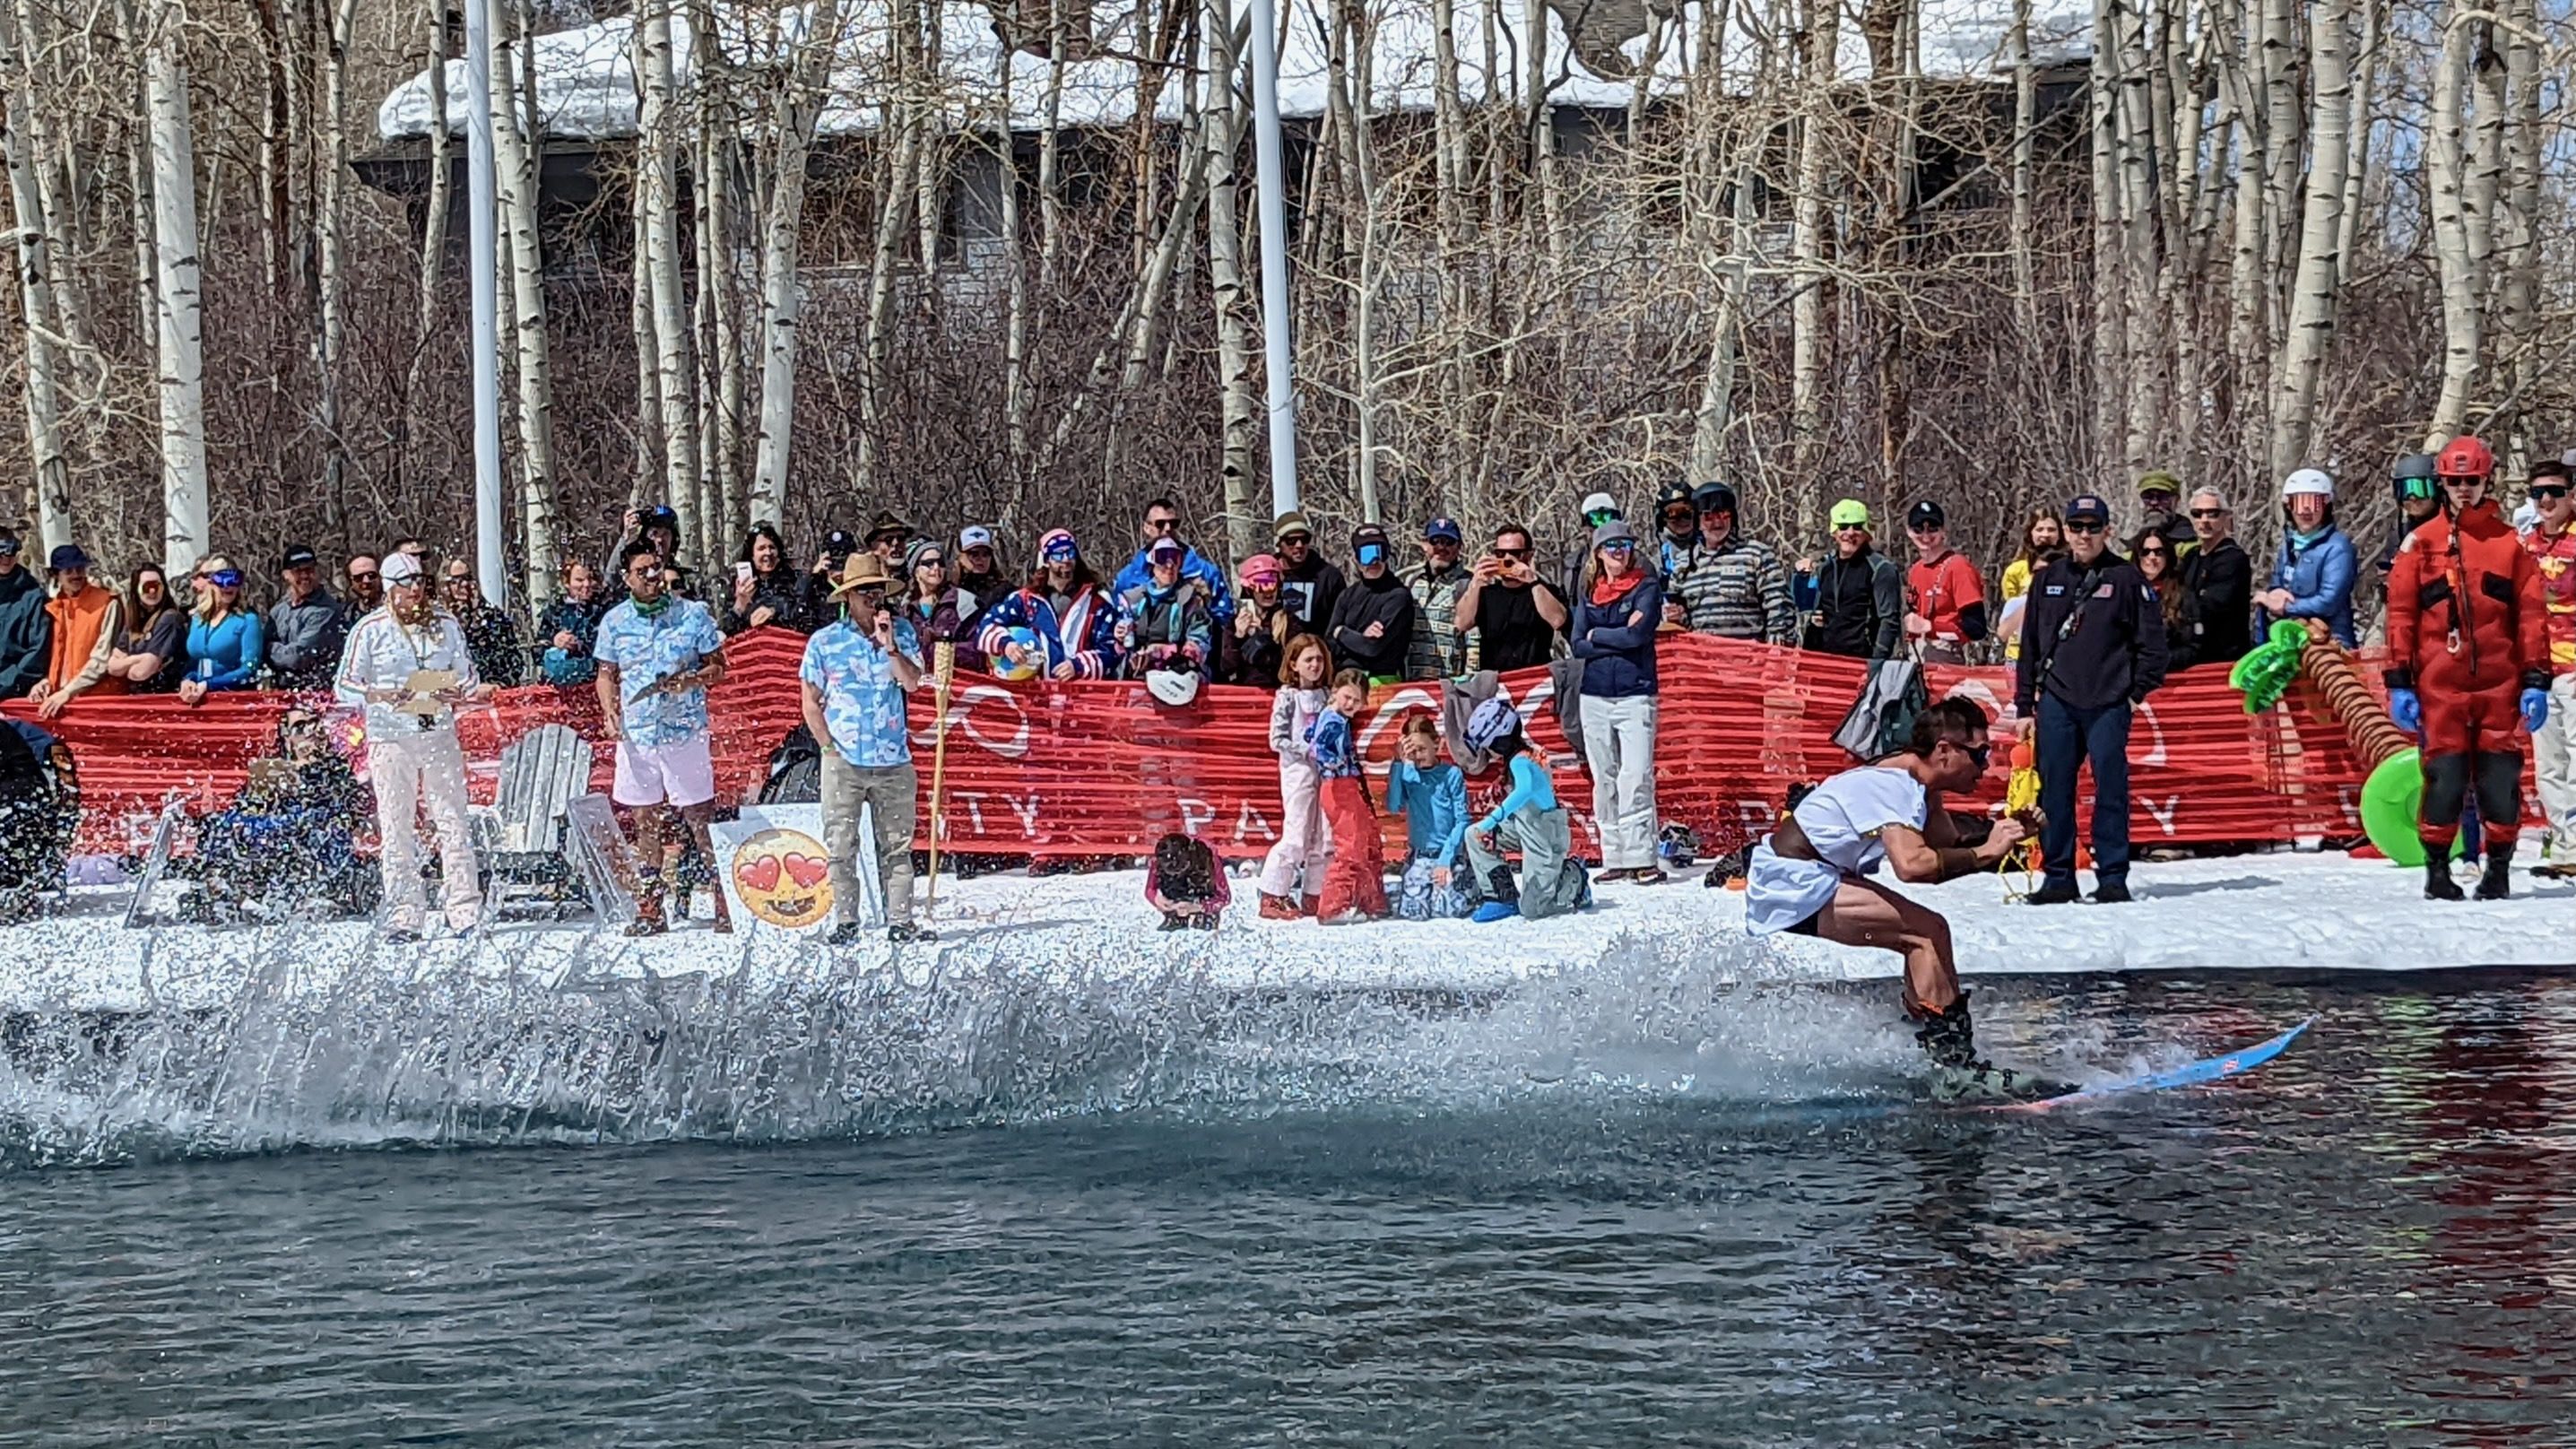 A man dressed as Spartacus skis across the water.